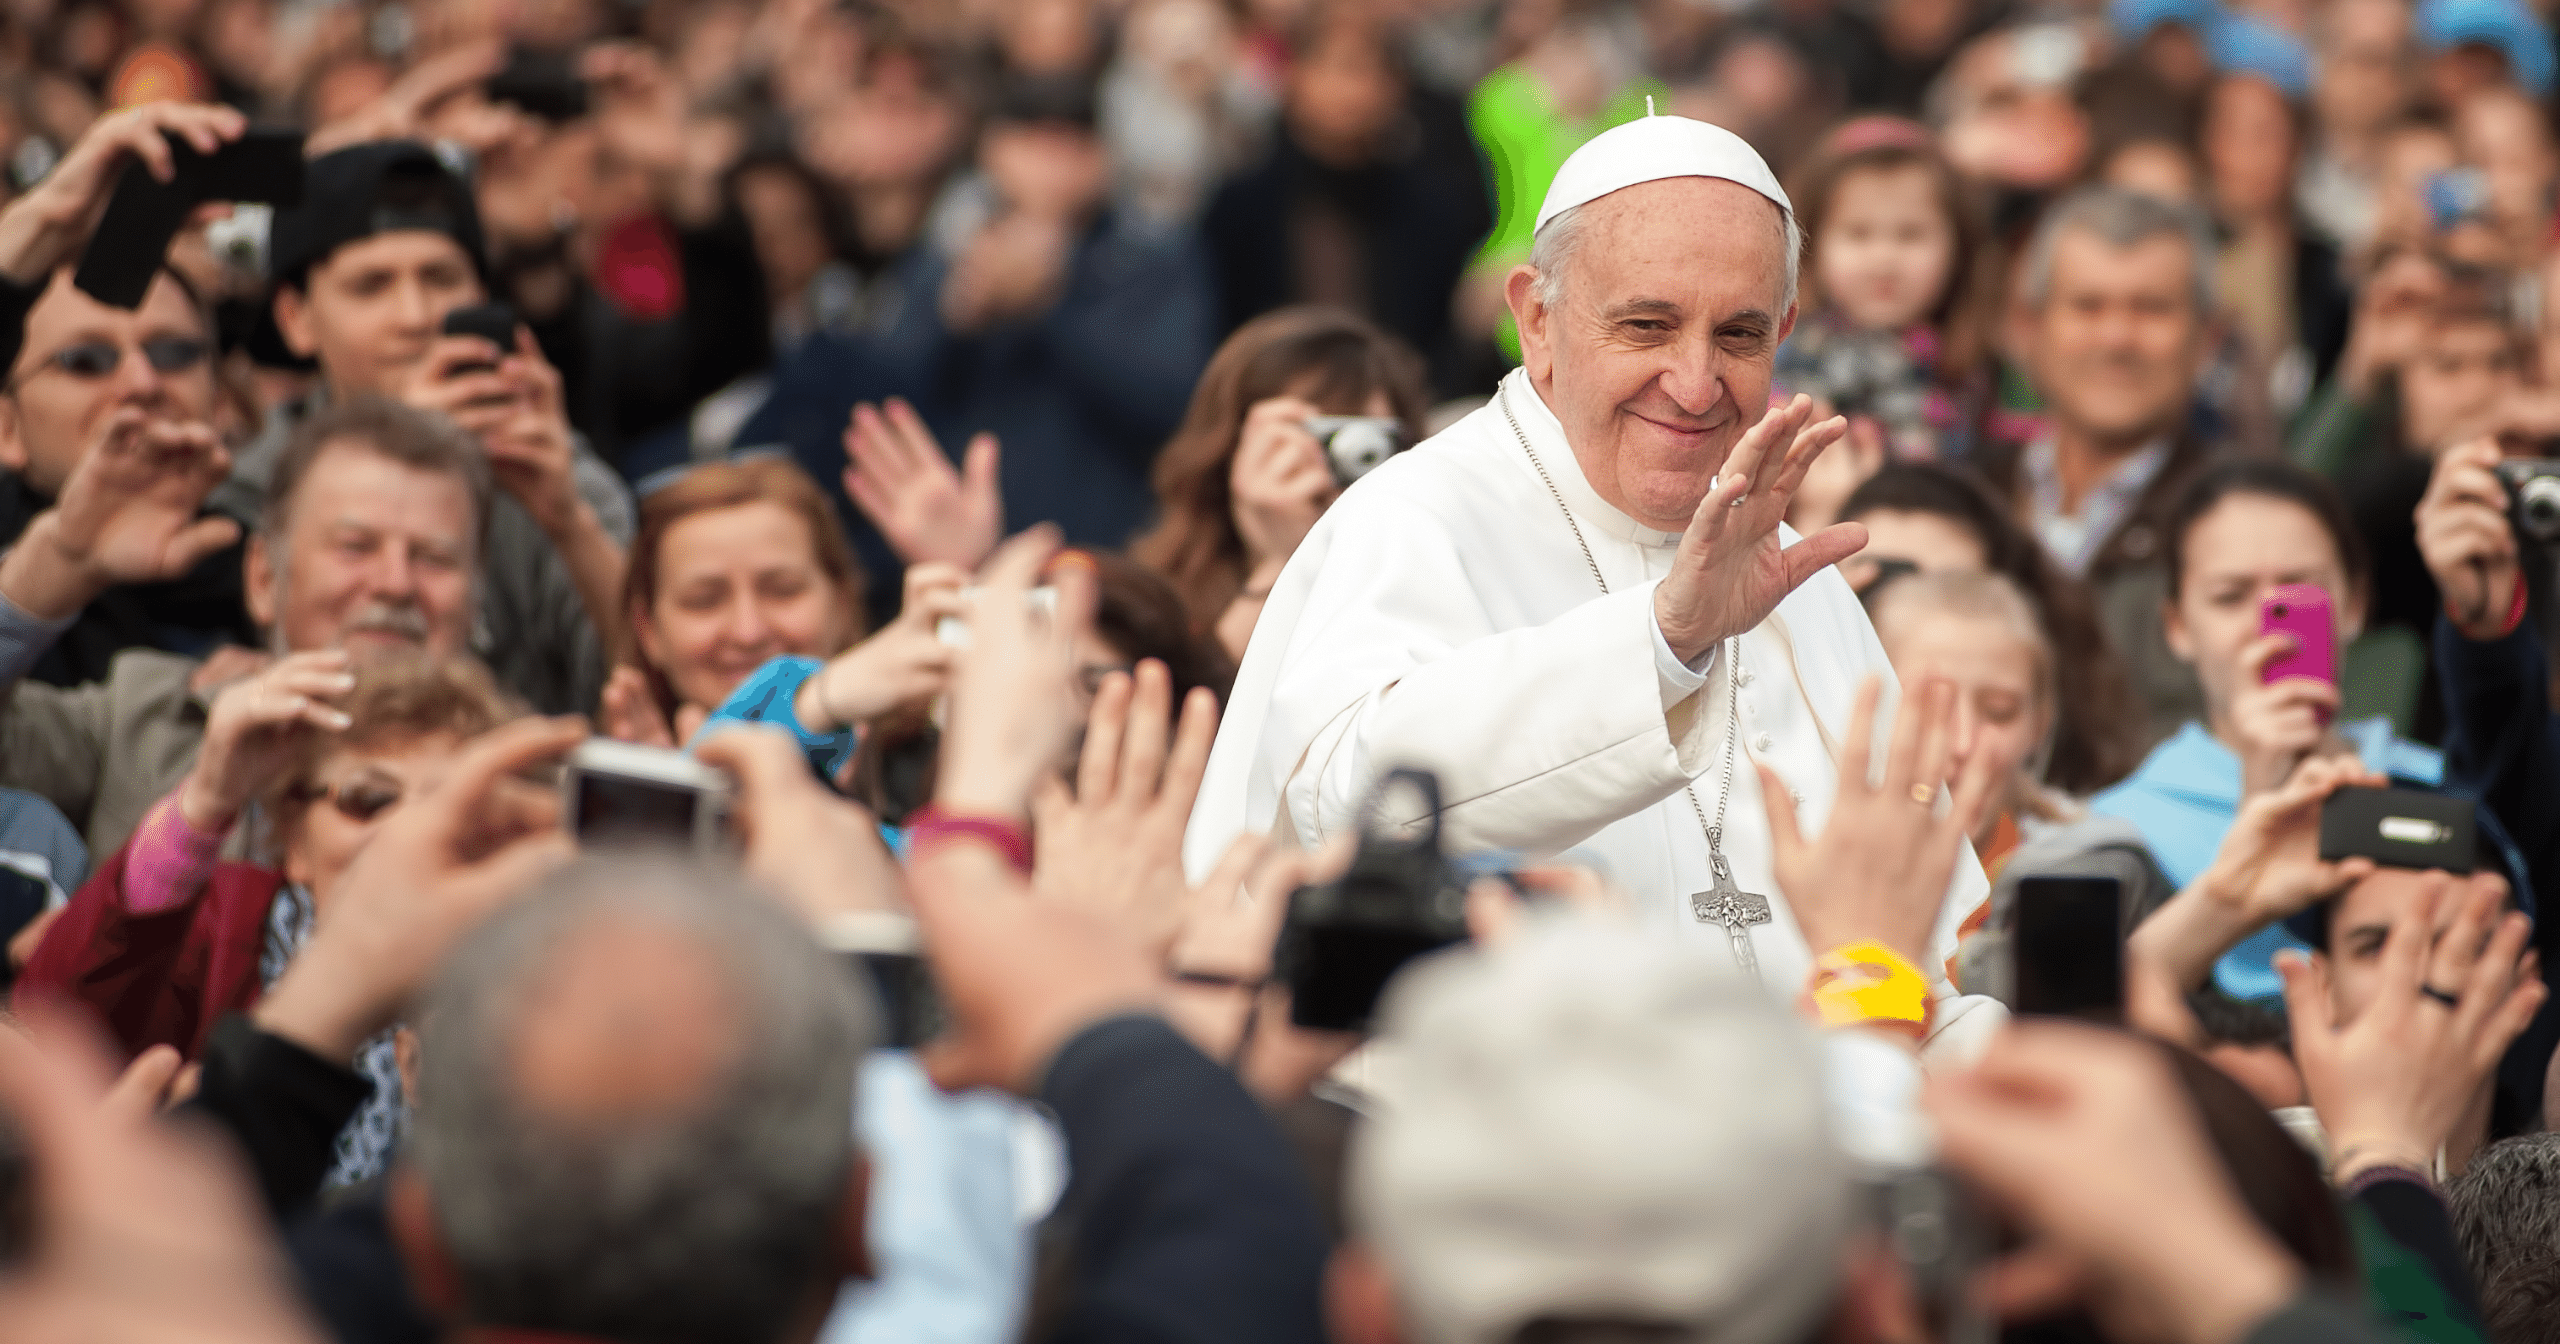 Watch Pope Francis’ Shares His Prayer Intention for a Church Open to